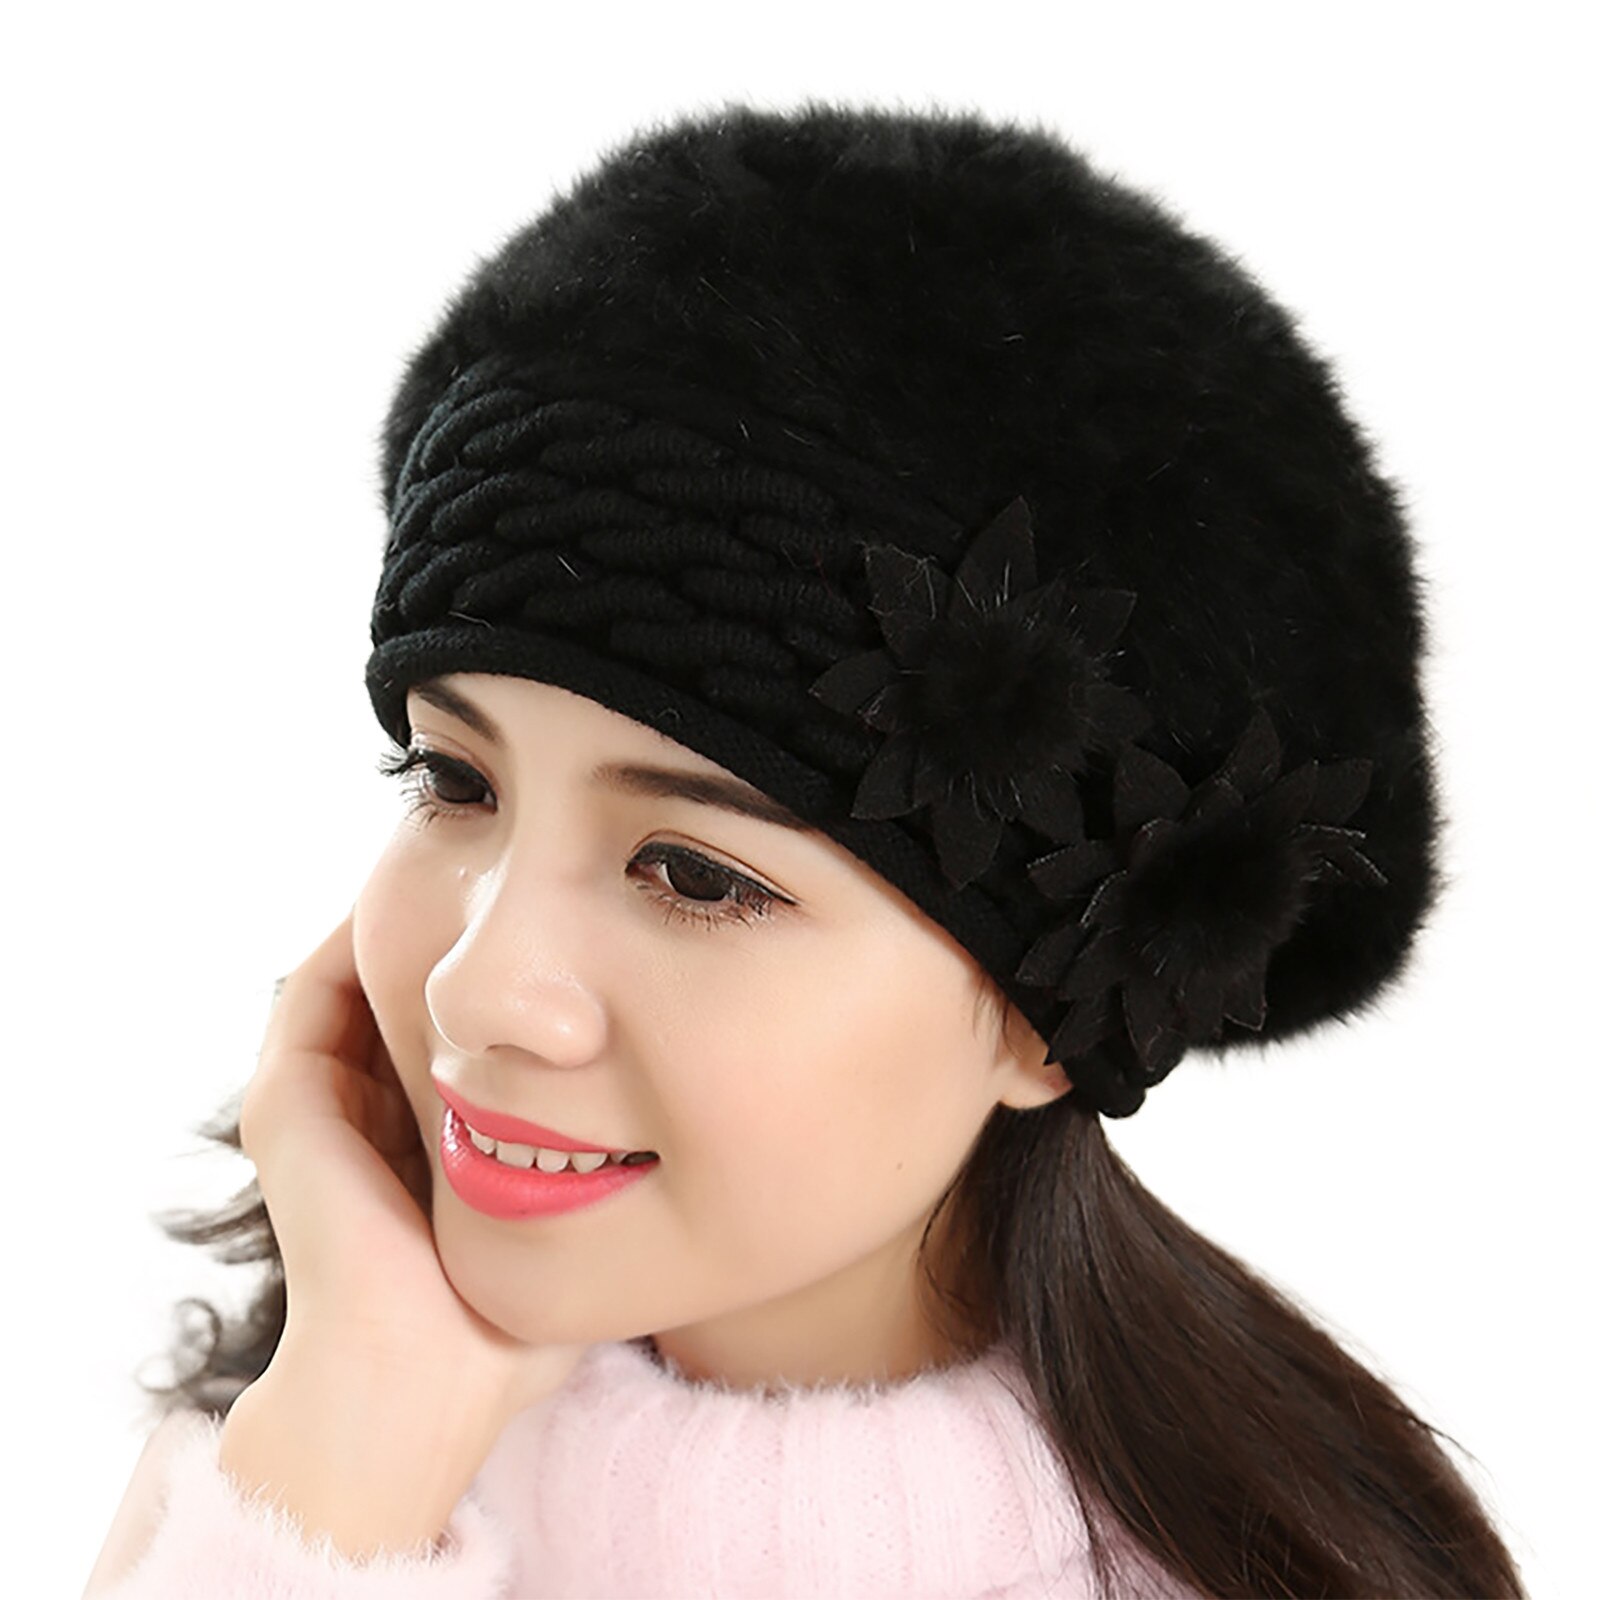 Beret Women Winter Hat Beanie Warm Knit Flower Double Layers Soft Thick Thermal Snow Skiing Outdoor Hats For Female Caps: Black